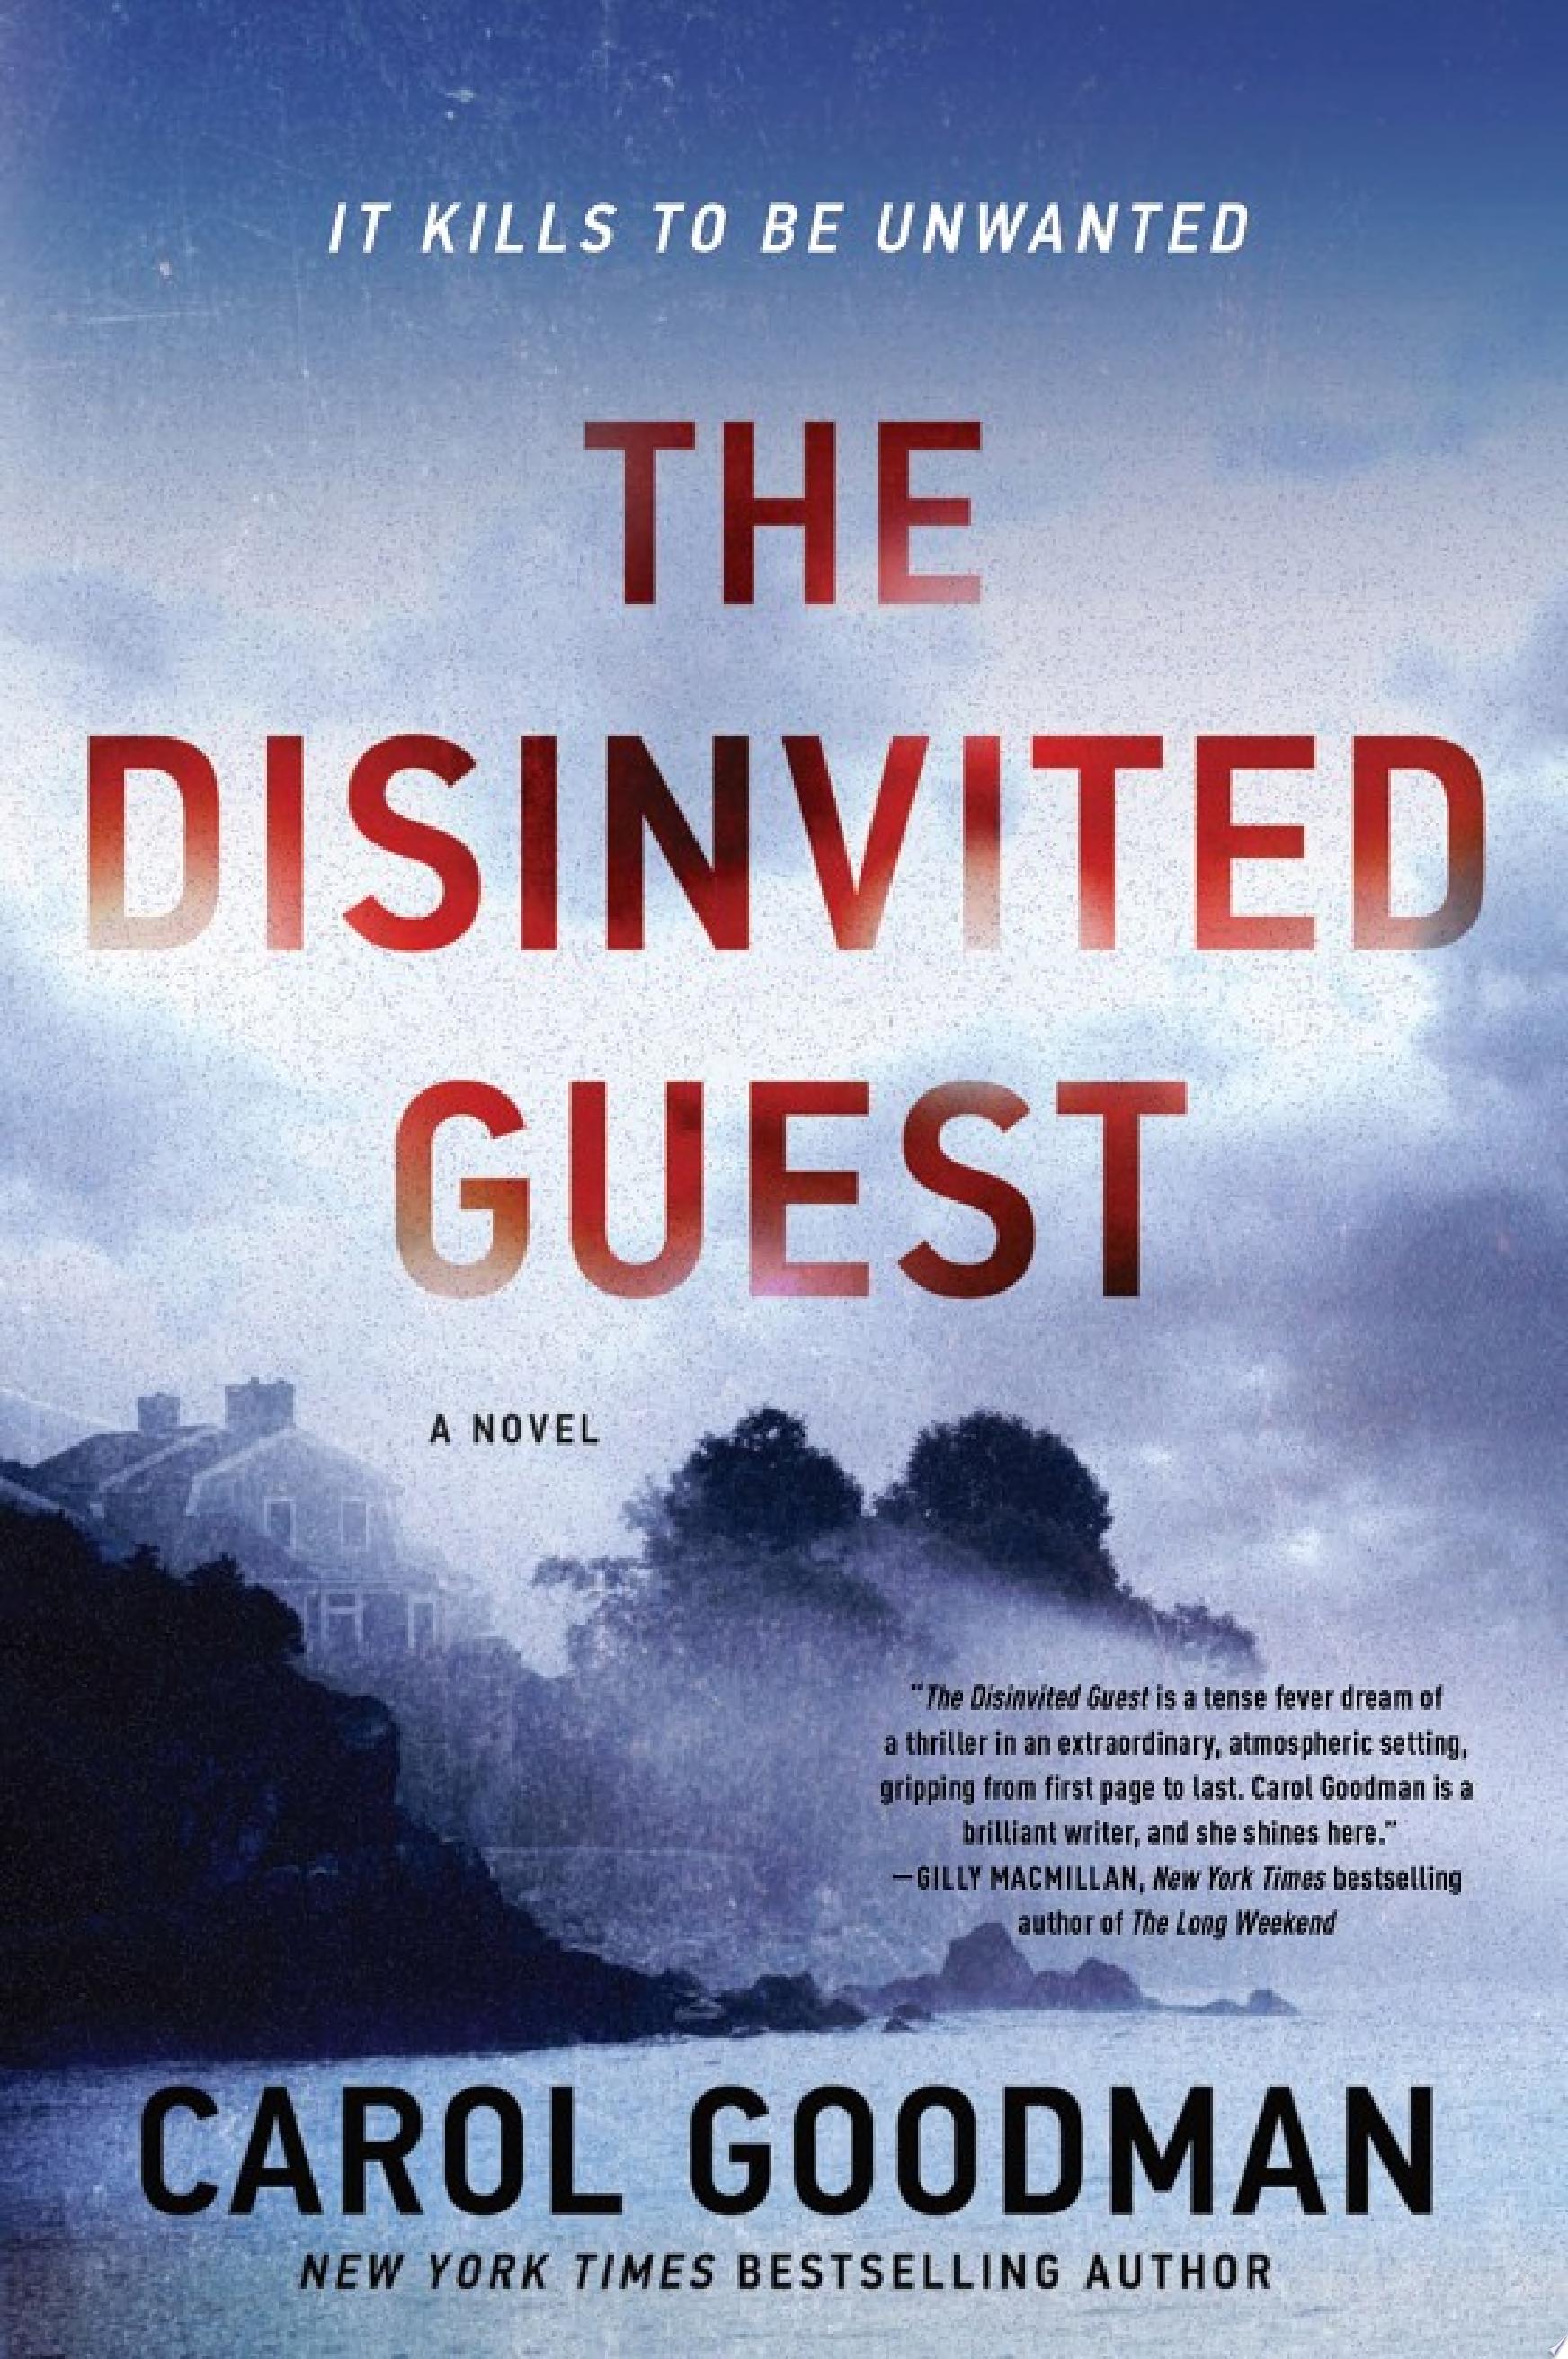 Image for "The Disinvited Guest"